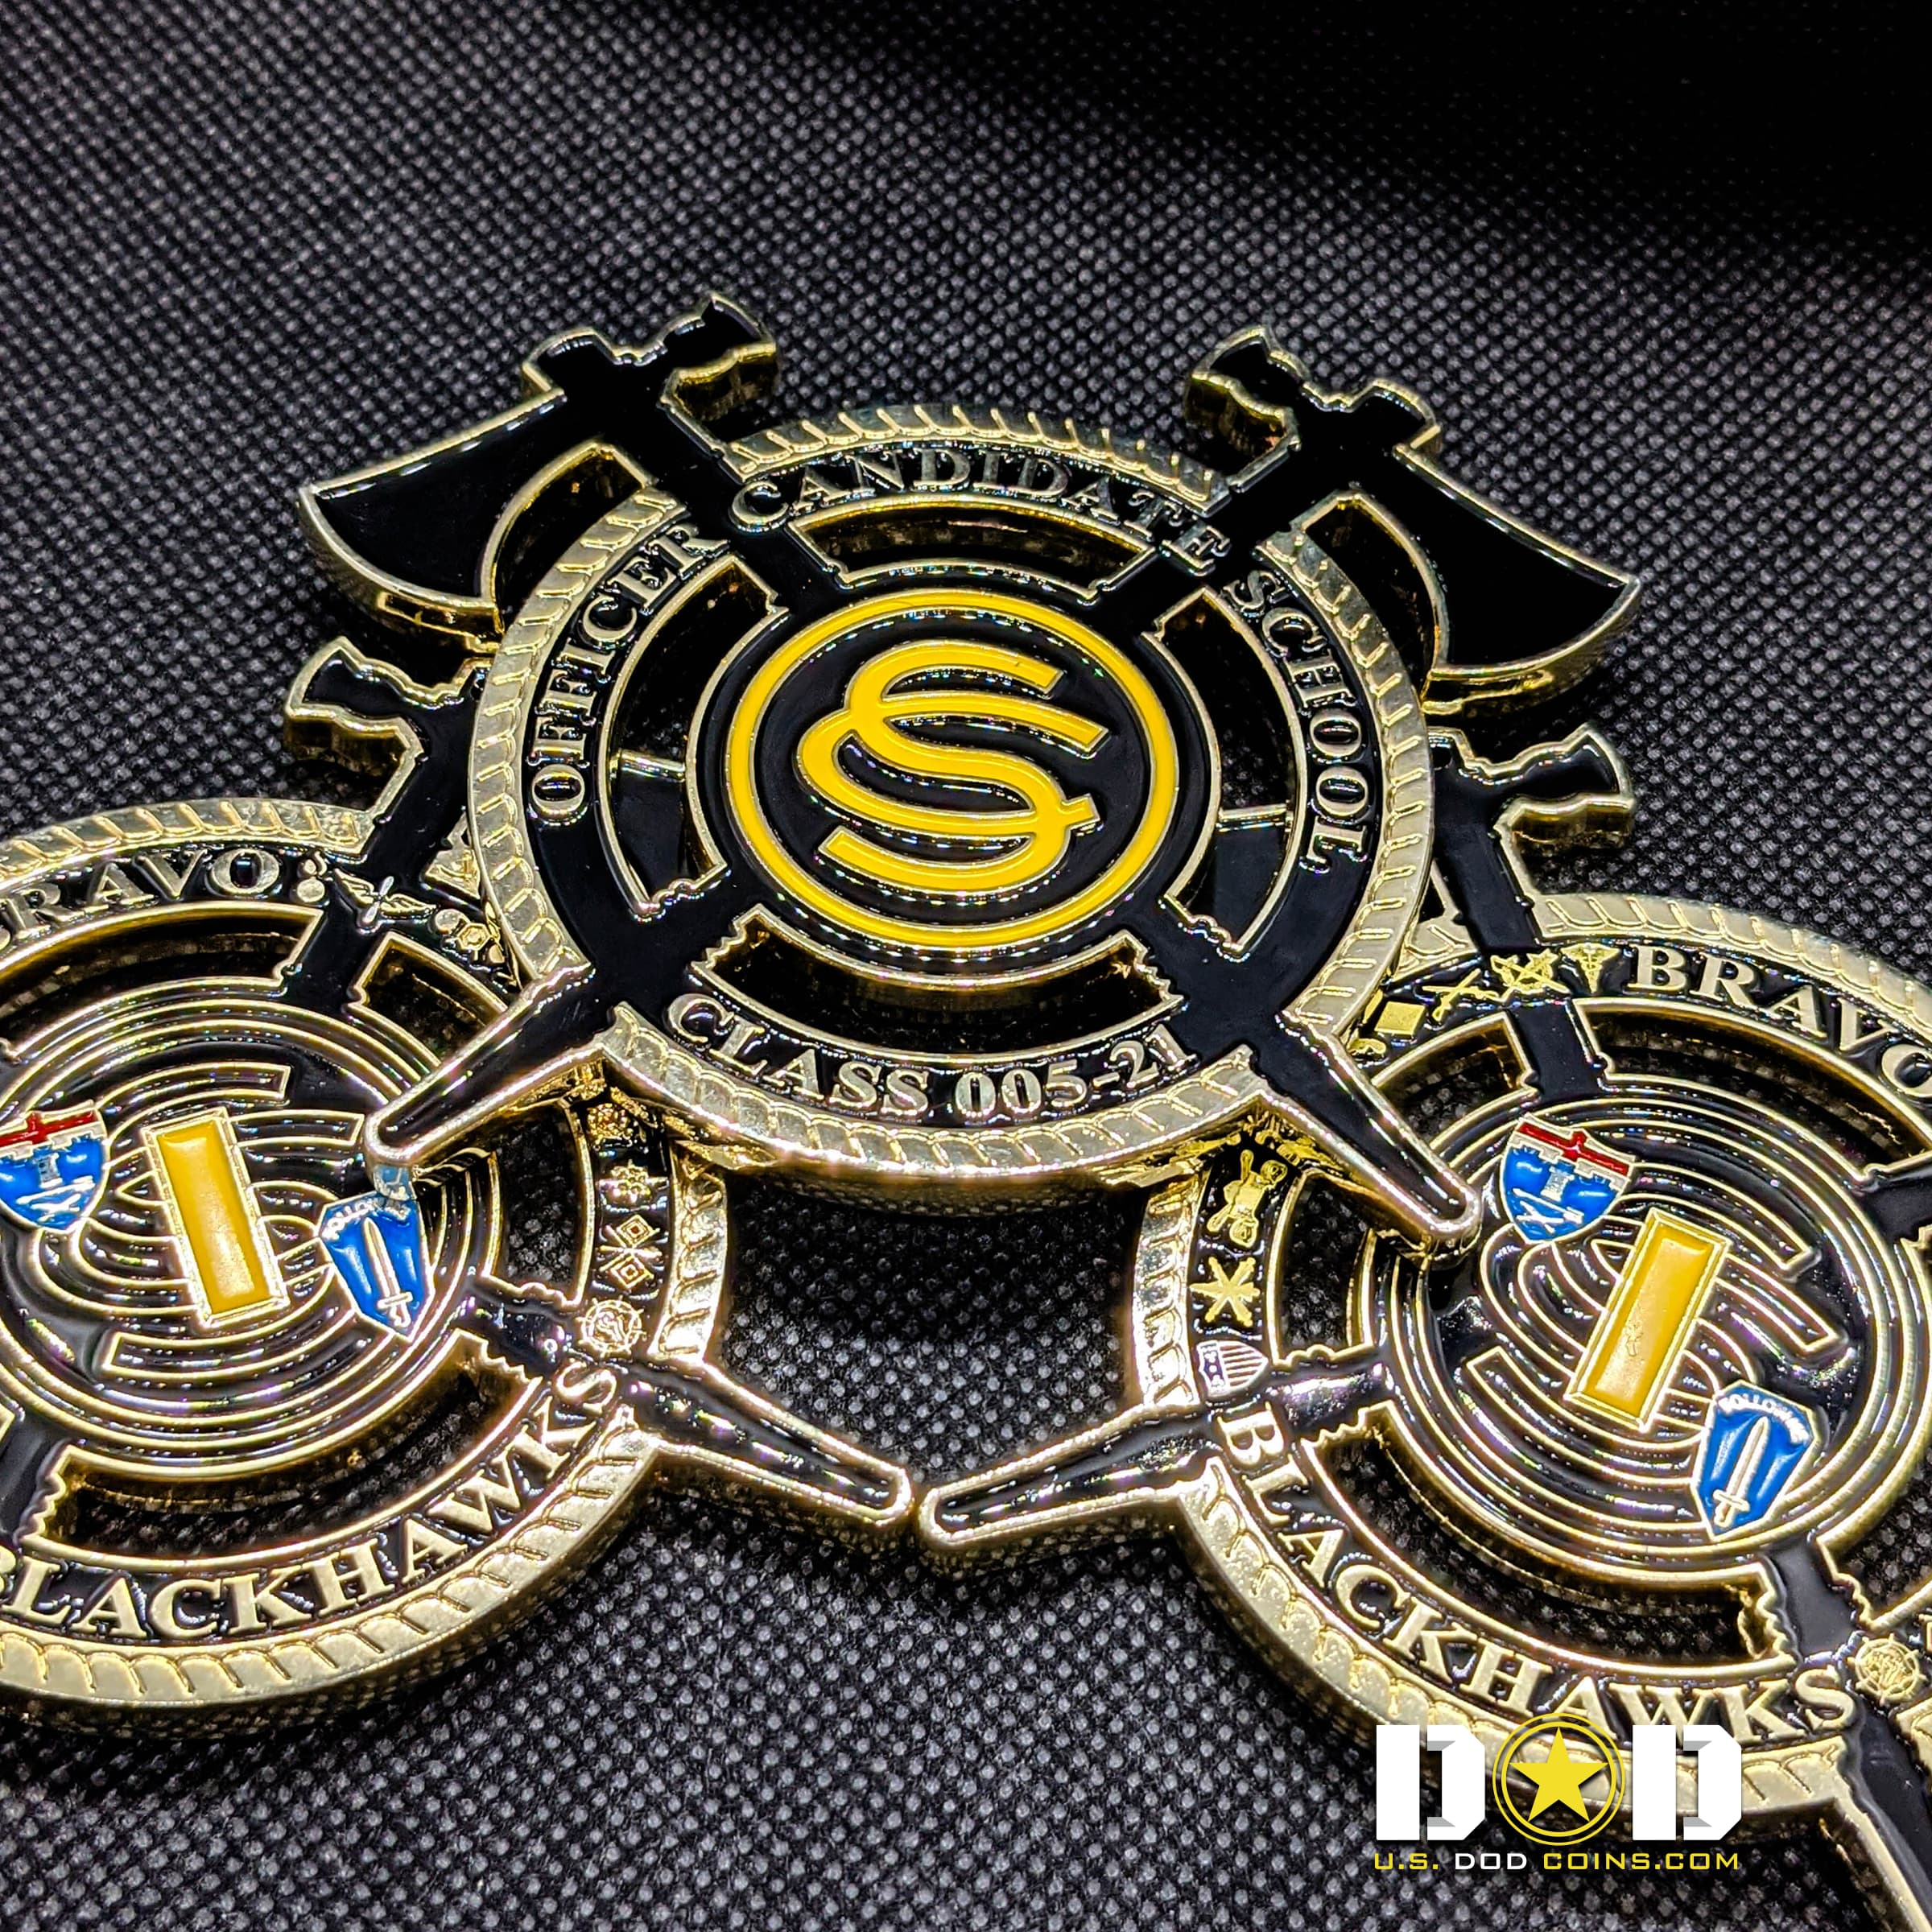 Officer-Candidate-School-Bravo-Blackhawks-Challenge-Coin_0002_USDODCoins-Challenge-Coins-Examples-31